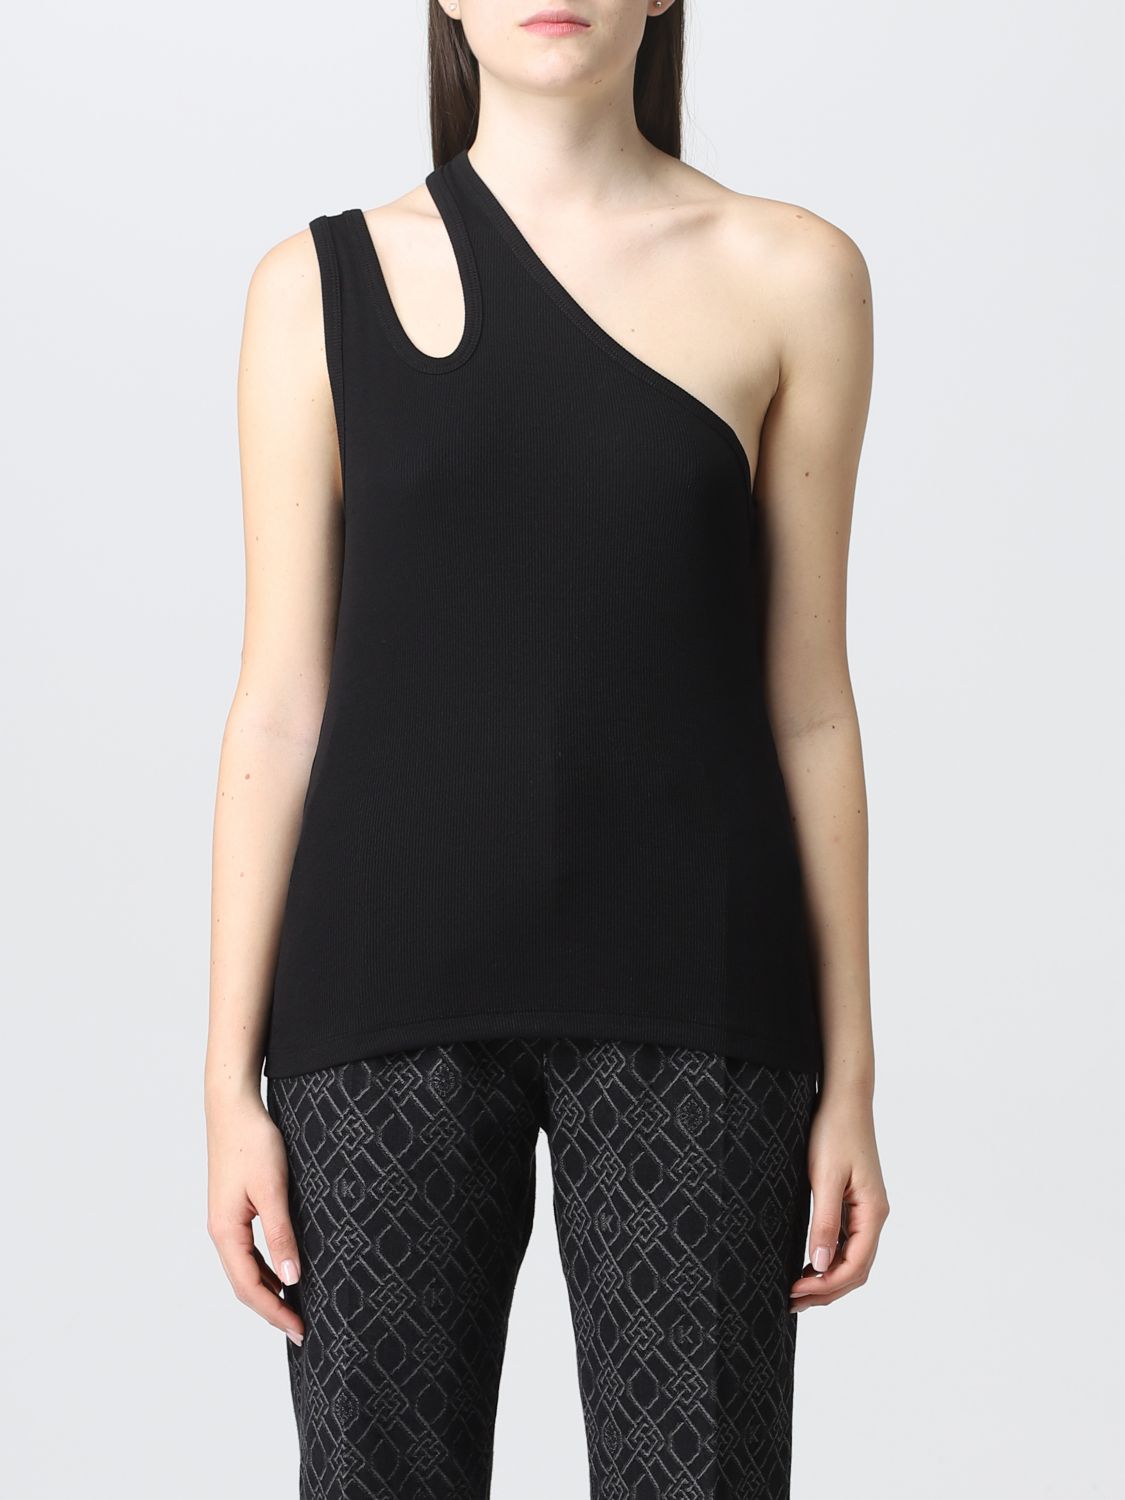 Top Remain: Remain top for women black 1